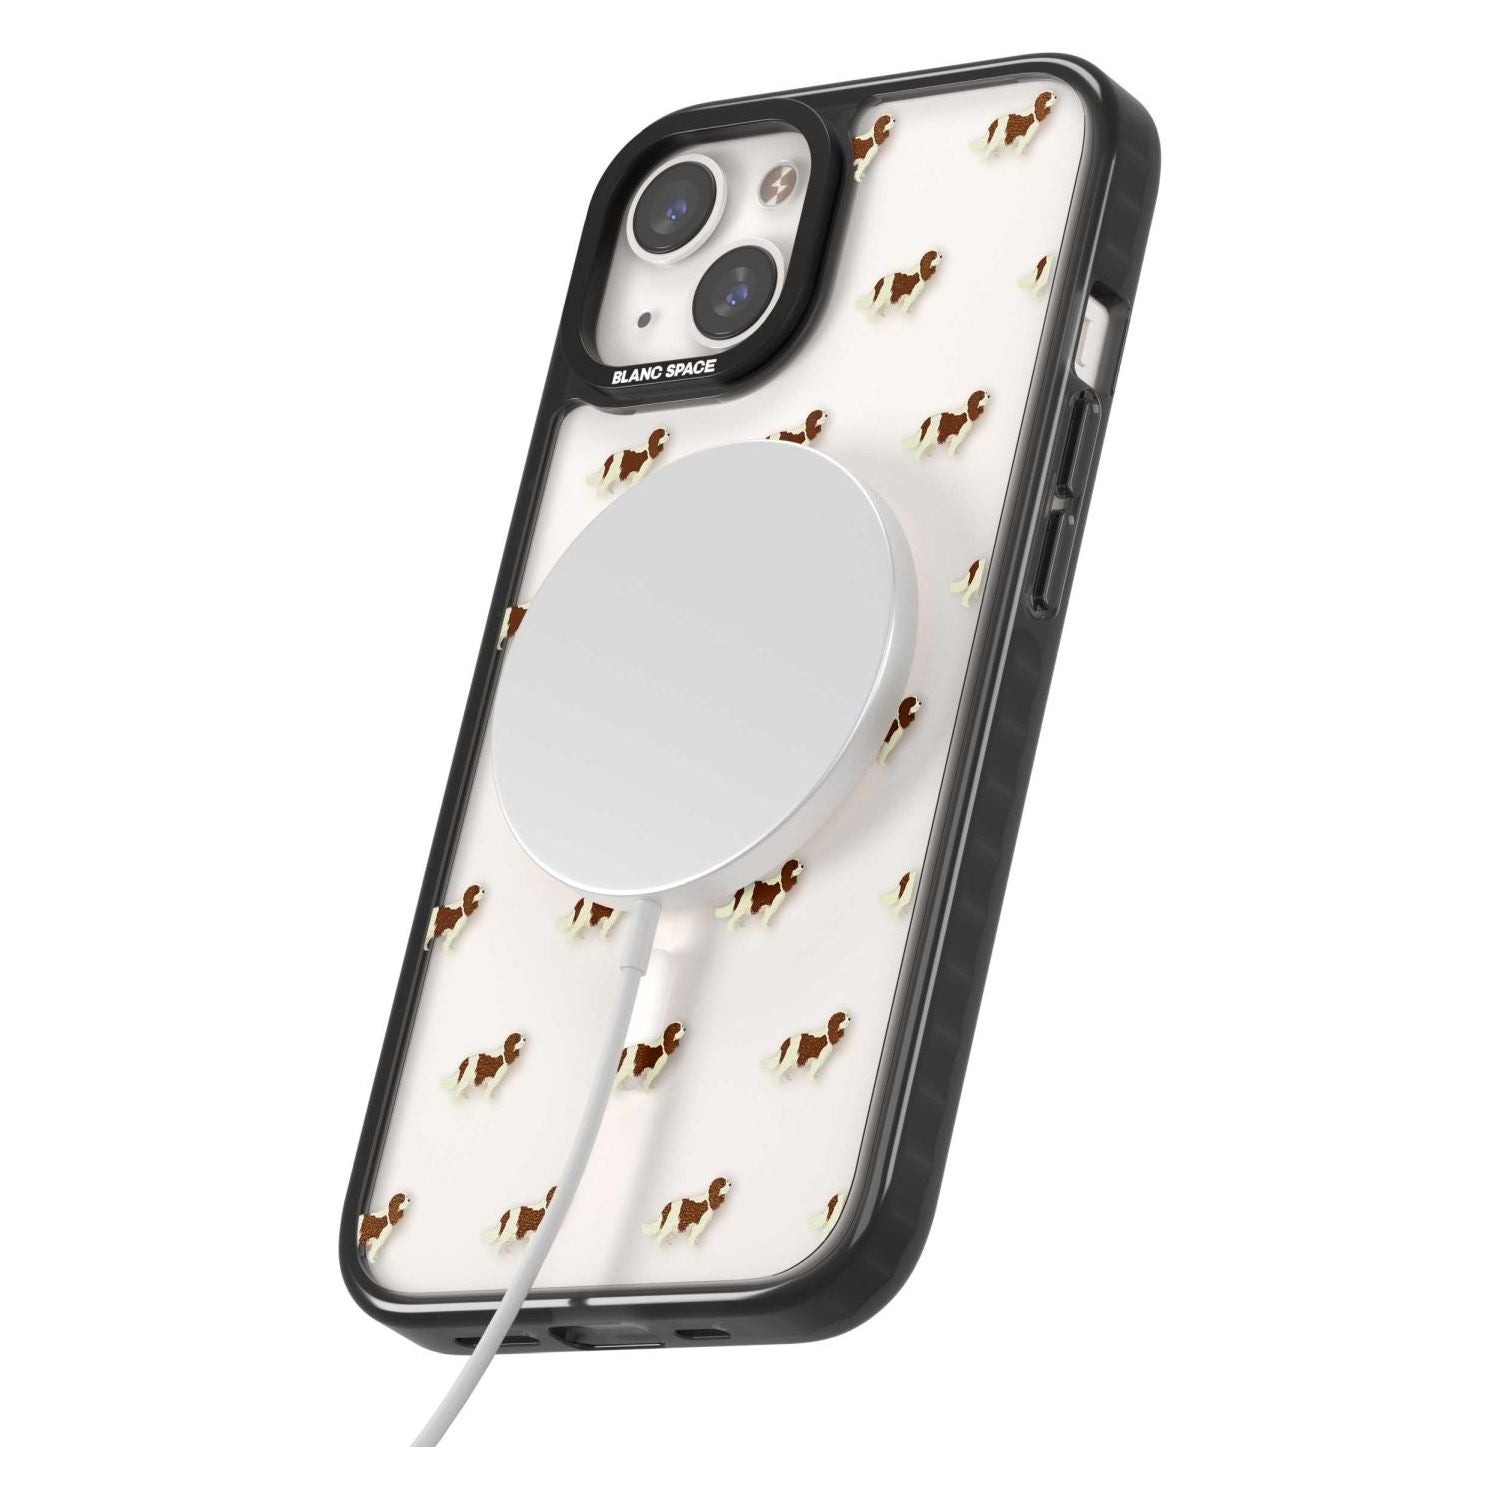 Cavalier King Charles Spaniel Pattern Clear Phone Case iPhone 15 Pro Max / Black Impact Case,iPhone 15 Plus / Black Impact Case,iPhone 15 Pro / Black Impact Case,iPhone 15 / Black Impact Case,iPhone 15 Pro Max / Impact Case,iPhone 15 Plus / Impact Case,iPhone 15 Pro / Impact Case,iPhone 15 / Impact Case,iPhone 15 Pro Max / Magsafe Black Impact Case,iPhone 15 Plus / Magsafe Black Impact Case,iPhone 15 Pro / Magsafe Black Impact Case,iPhone 15 / Magsafe Black Impact Case,iPhone 14 Pro Max / Black Impact Case,